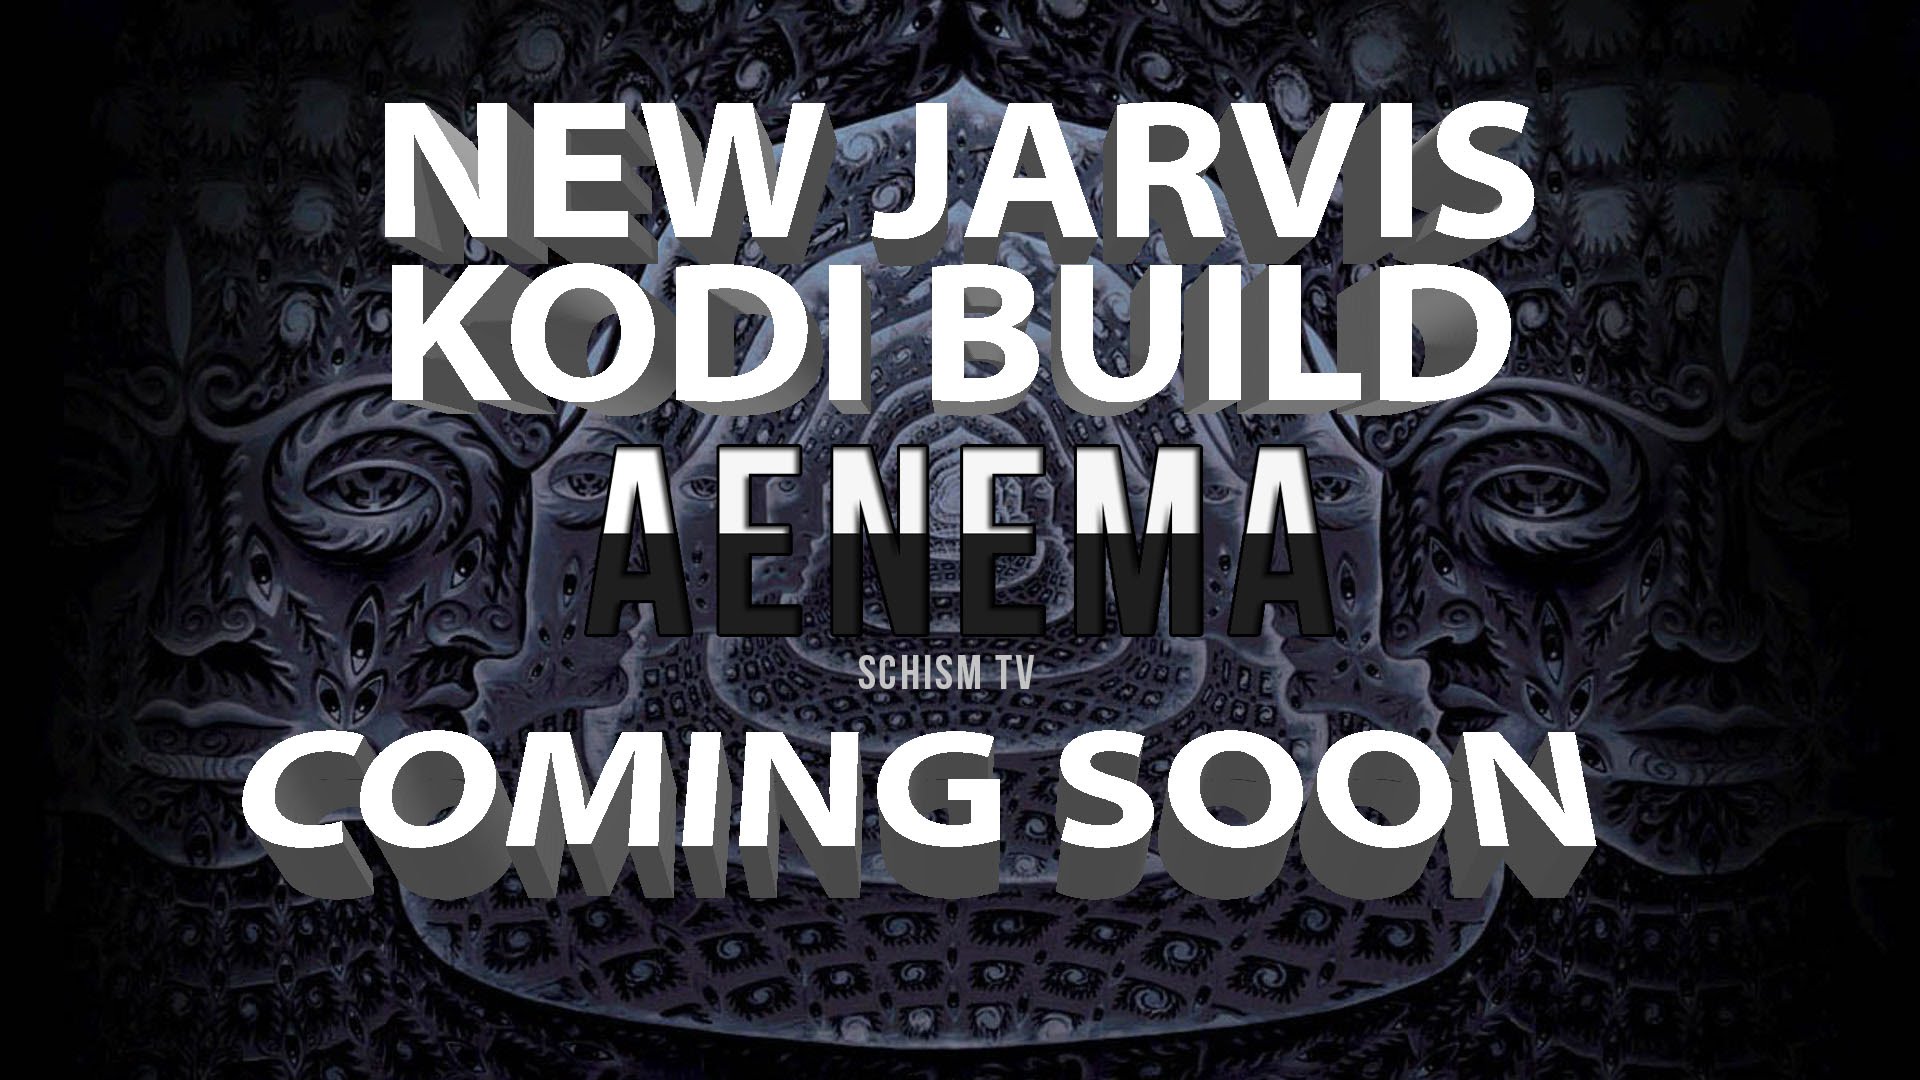 You are currently viewing New Schism TV build Kodi coming to Jarvis (ANEMA) Preview Only!